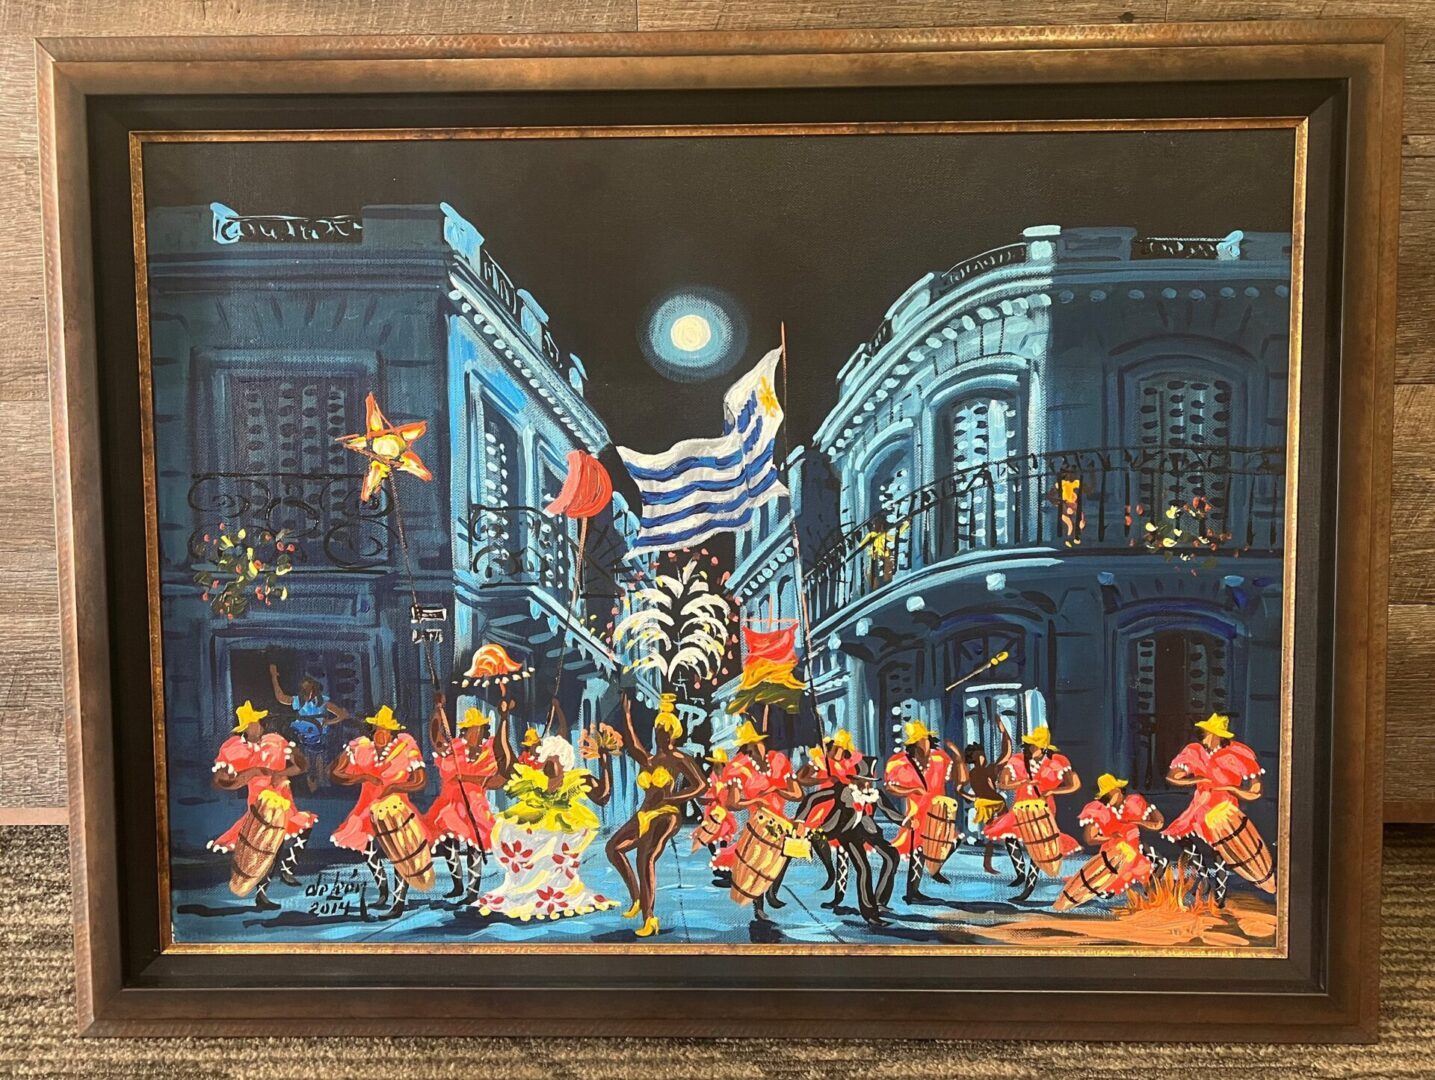 A painting of people in costumes on the street.